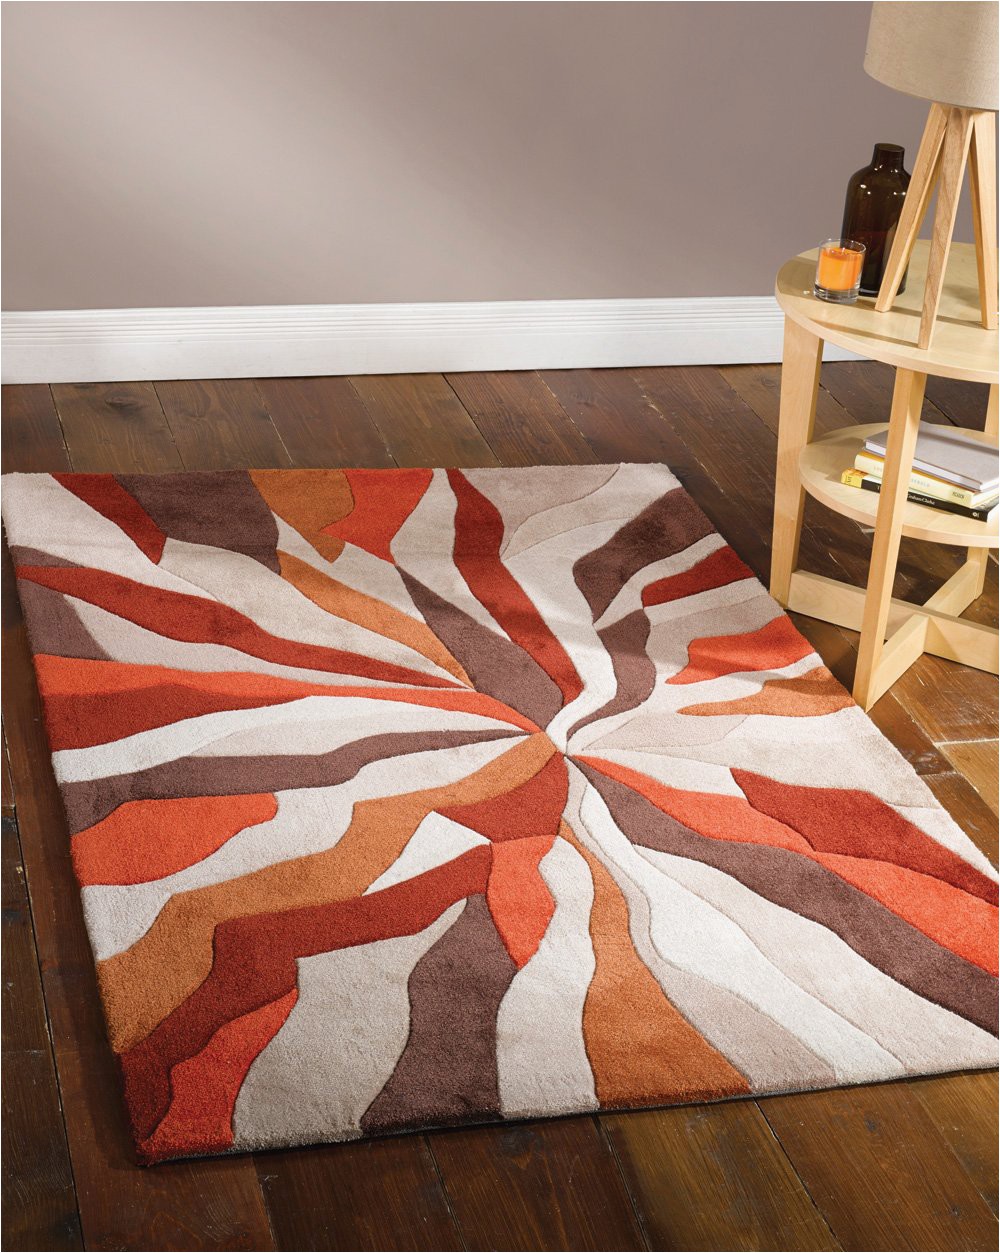 Very Large area Rugs Cheap Lord Of Rugs Very Quality Heavyweight Modern Art Design orange Brown area Rug In 160 X 220 Cm 5 3 X 7 4 Carpet